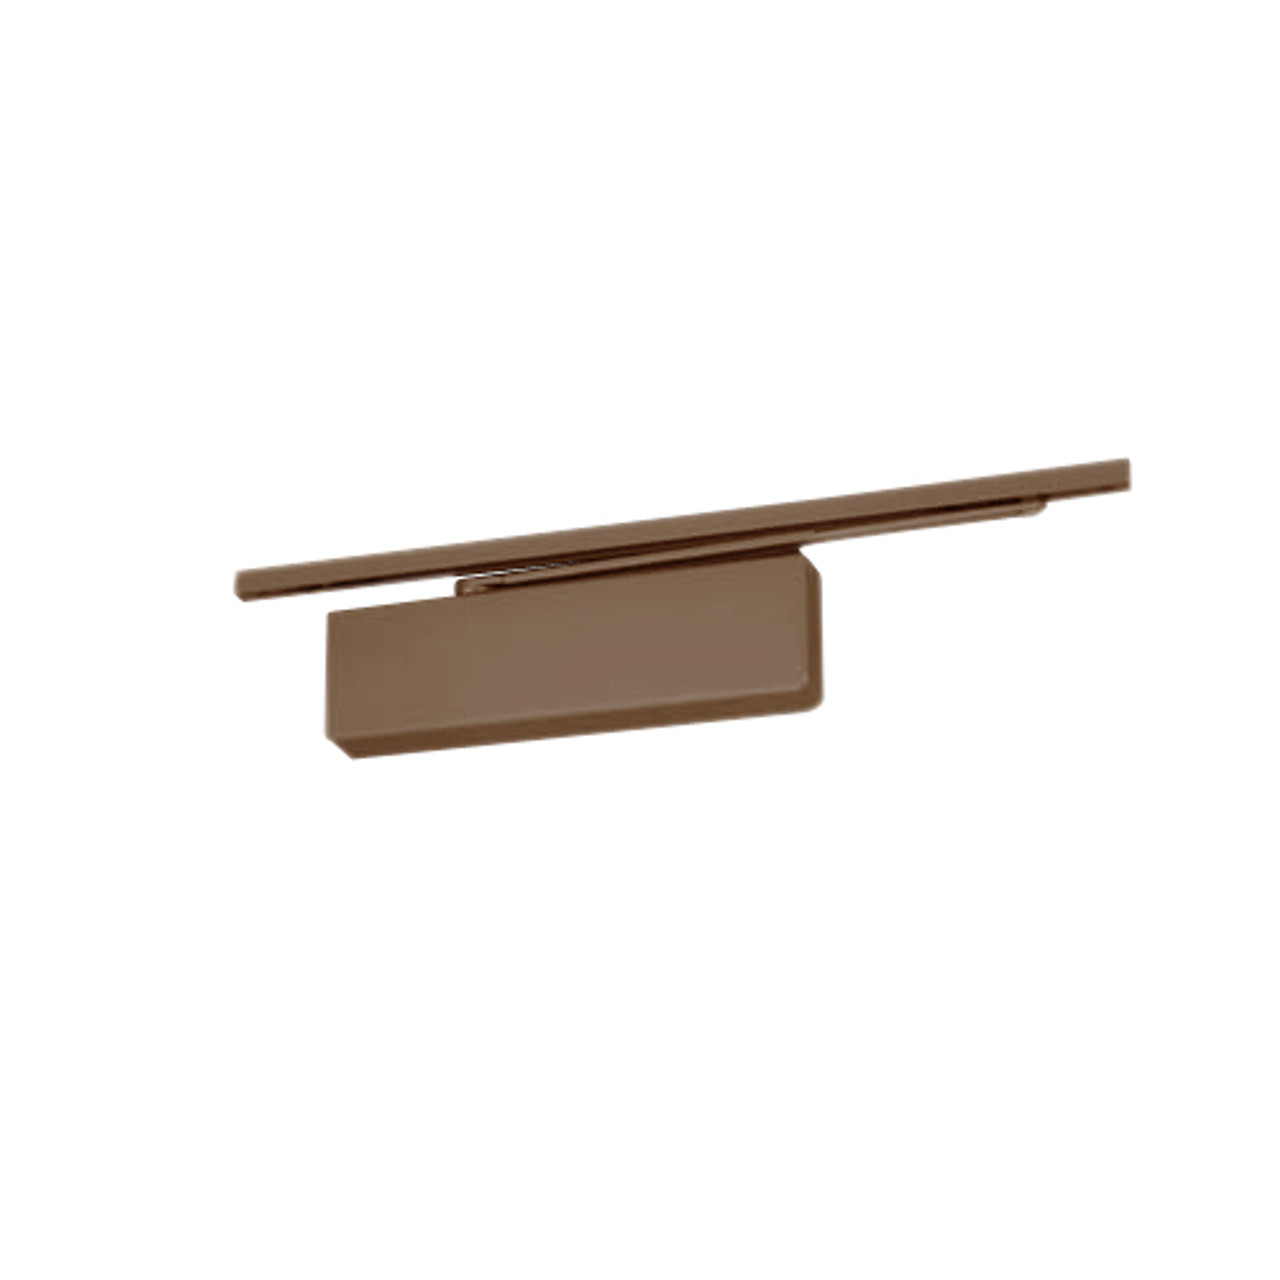 PS7570ST-691-LH Norton 7570 Series Security Door Closer with Push Side Slide Track Arm in Dull Bronze Finish